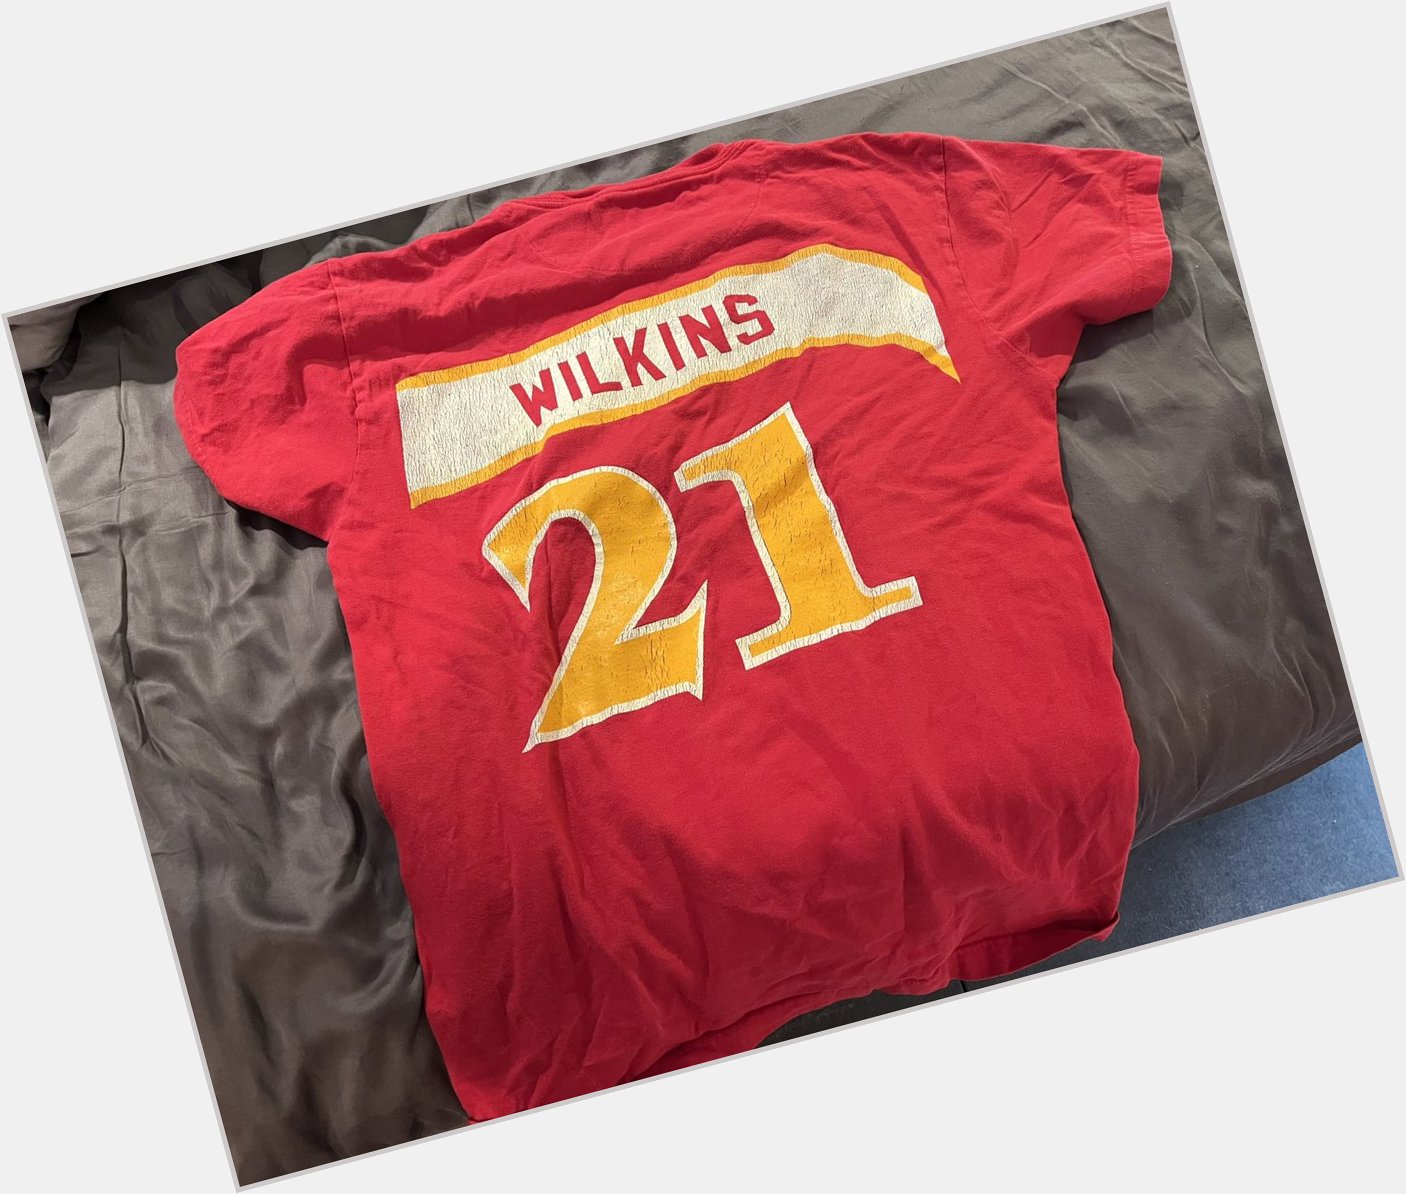 Dominique Wilkins t-shirt day. Happy birthday to one of my favorite players when I was a kid 